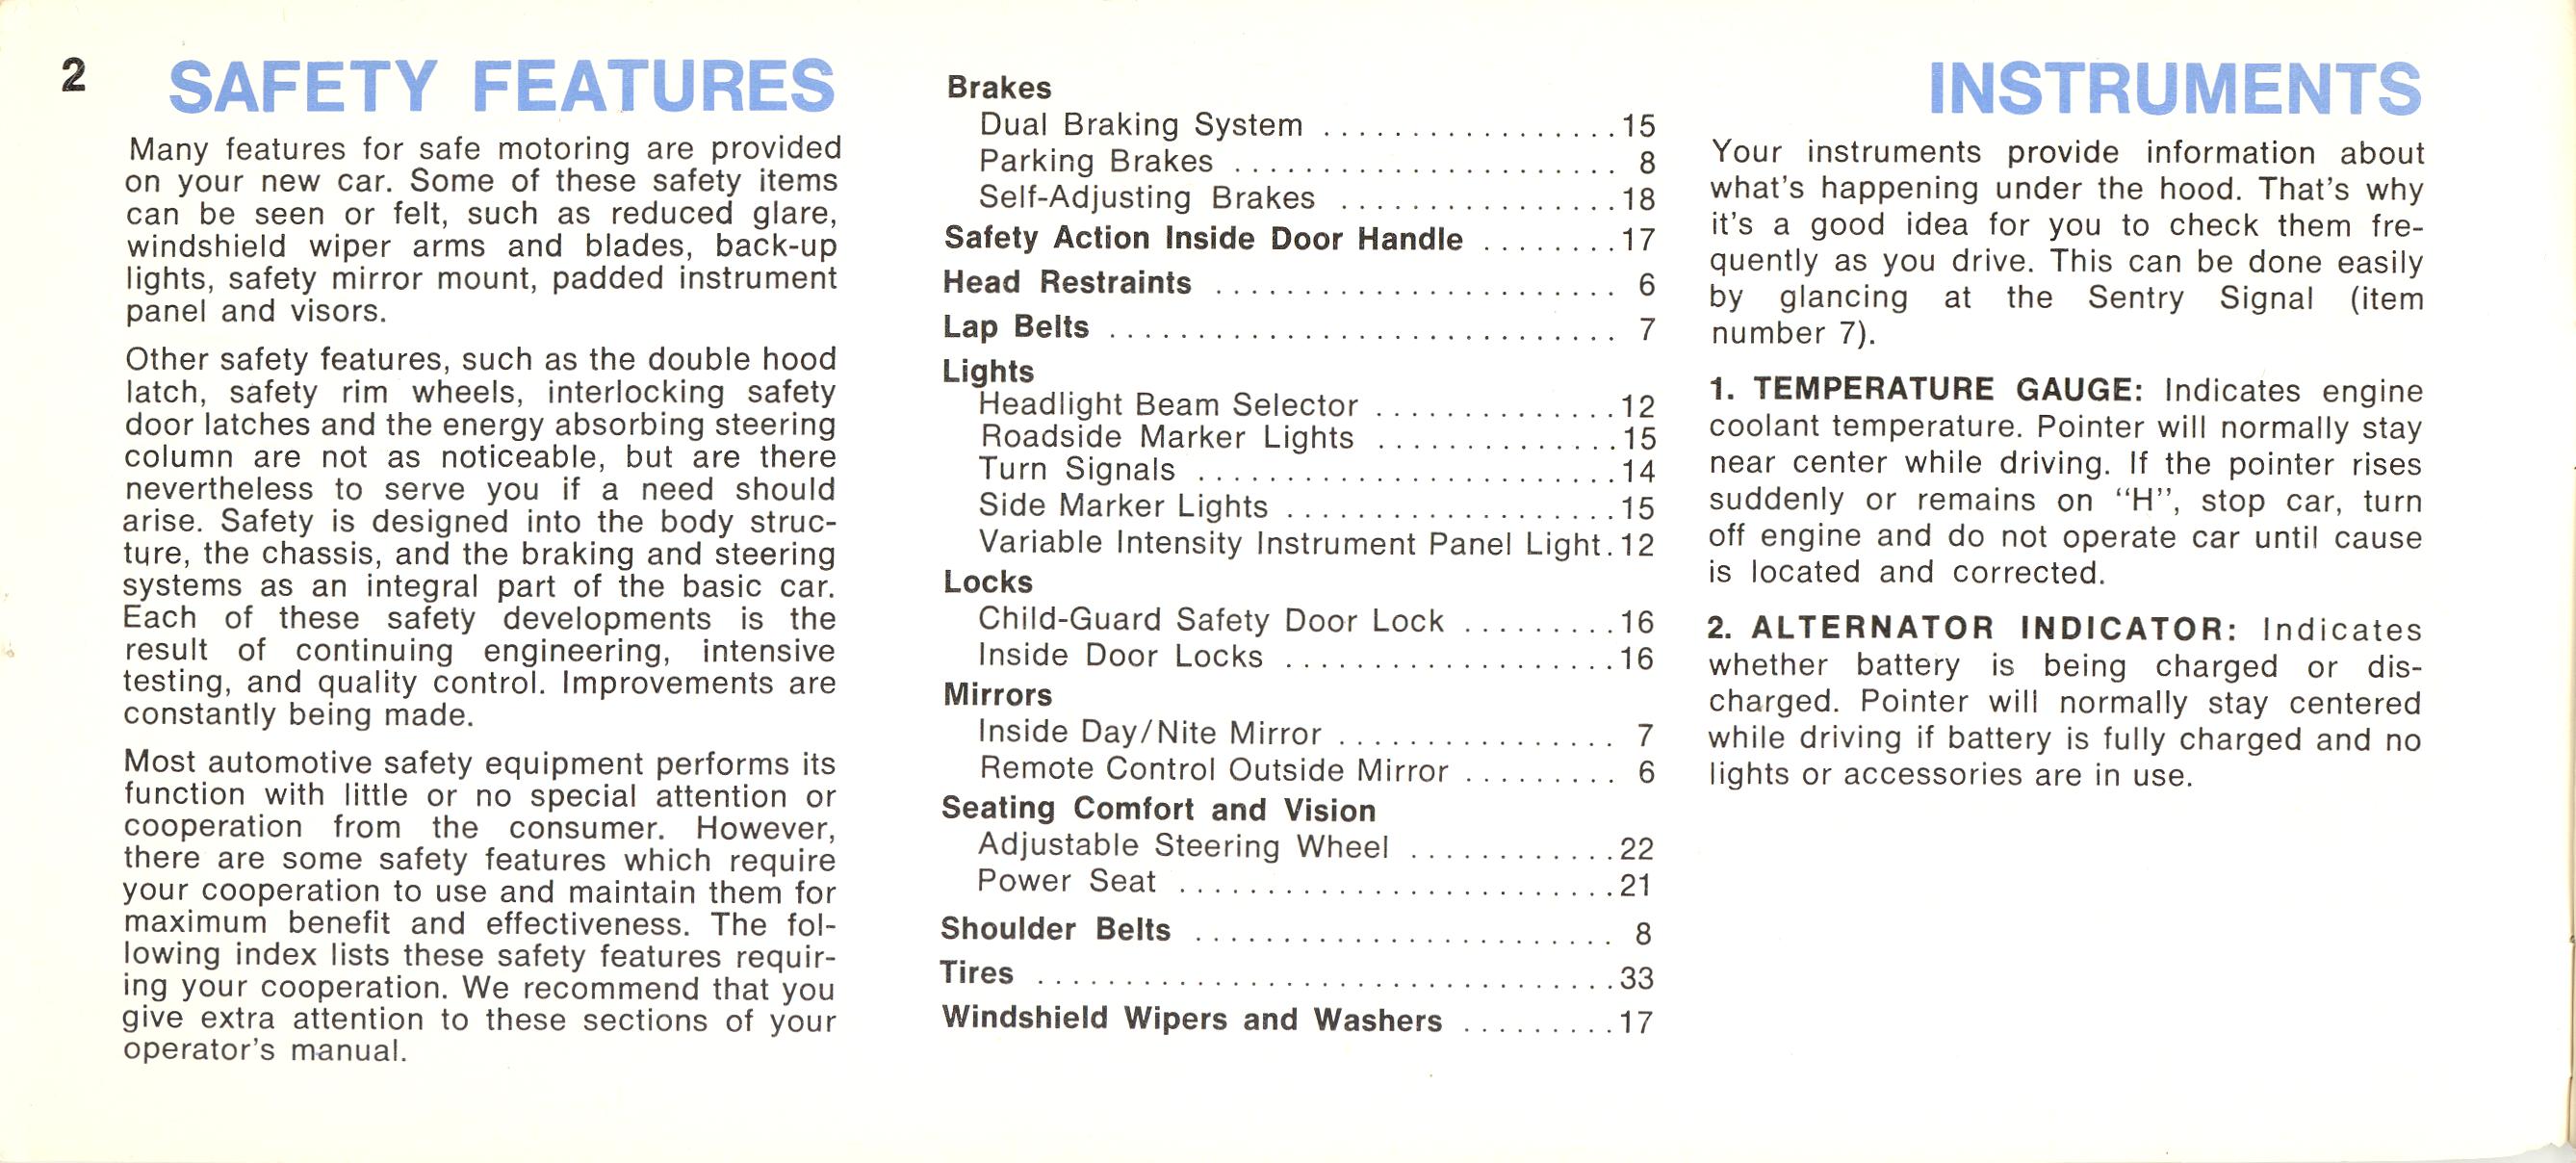 1968 Chrysler Imperial Owners Manual Page 39